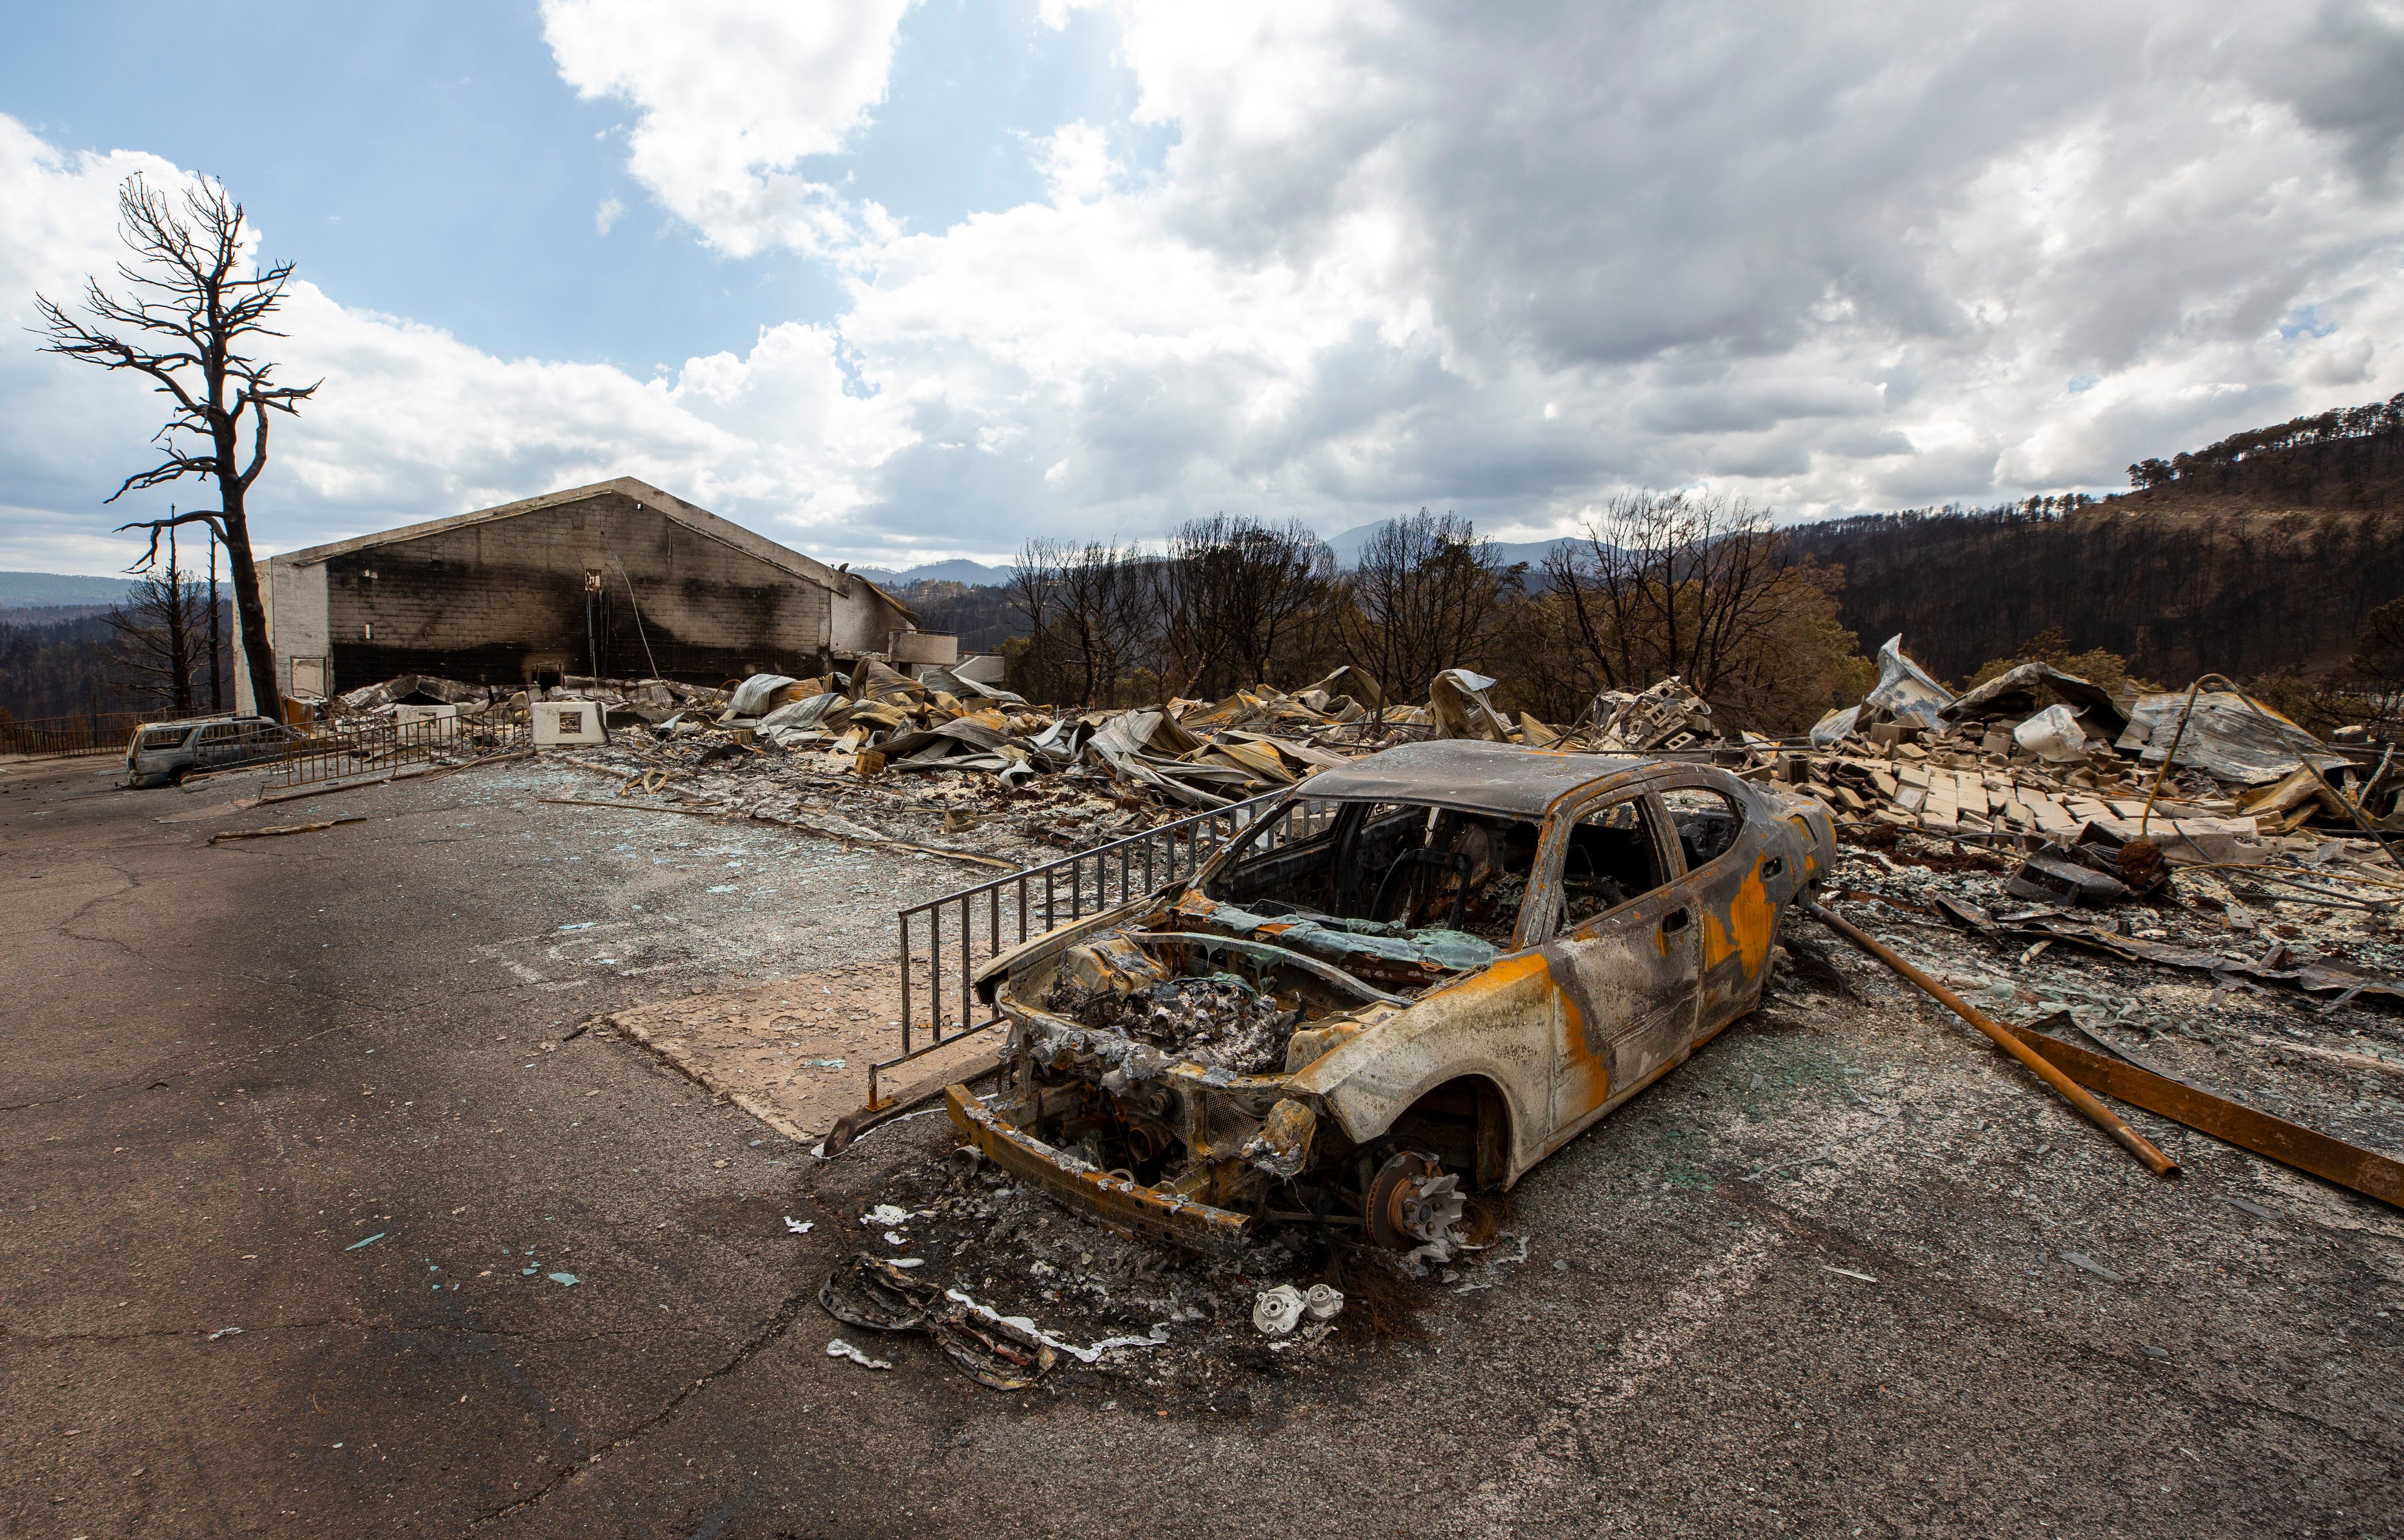 No human remains are found as search crews comb rubble from New Mexico wildfires thumbnail